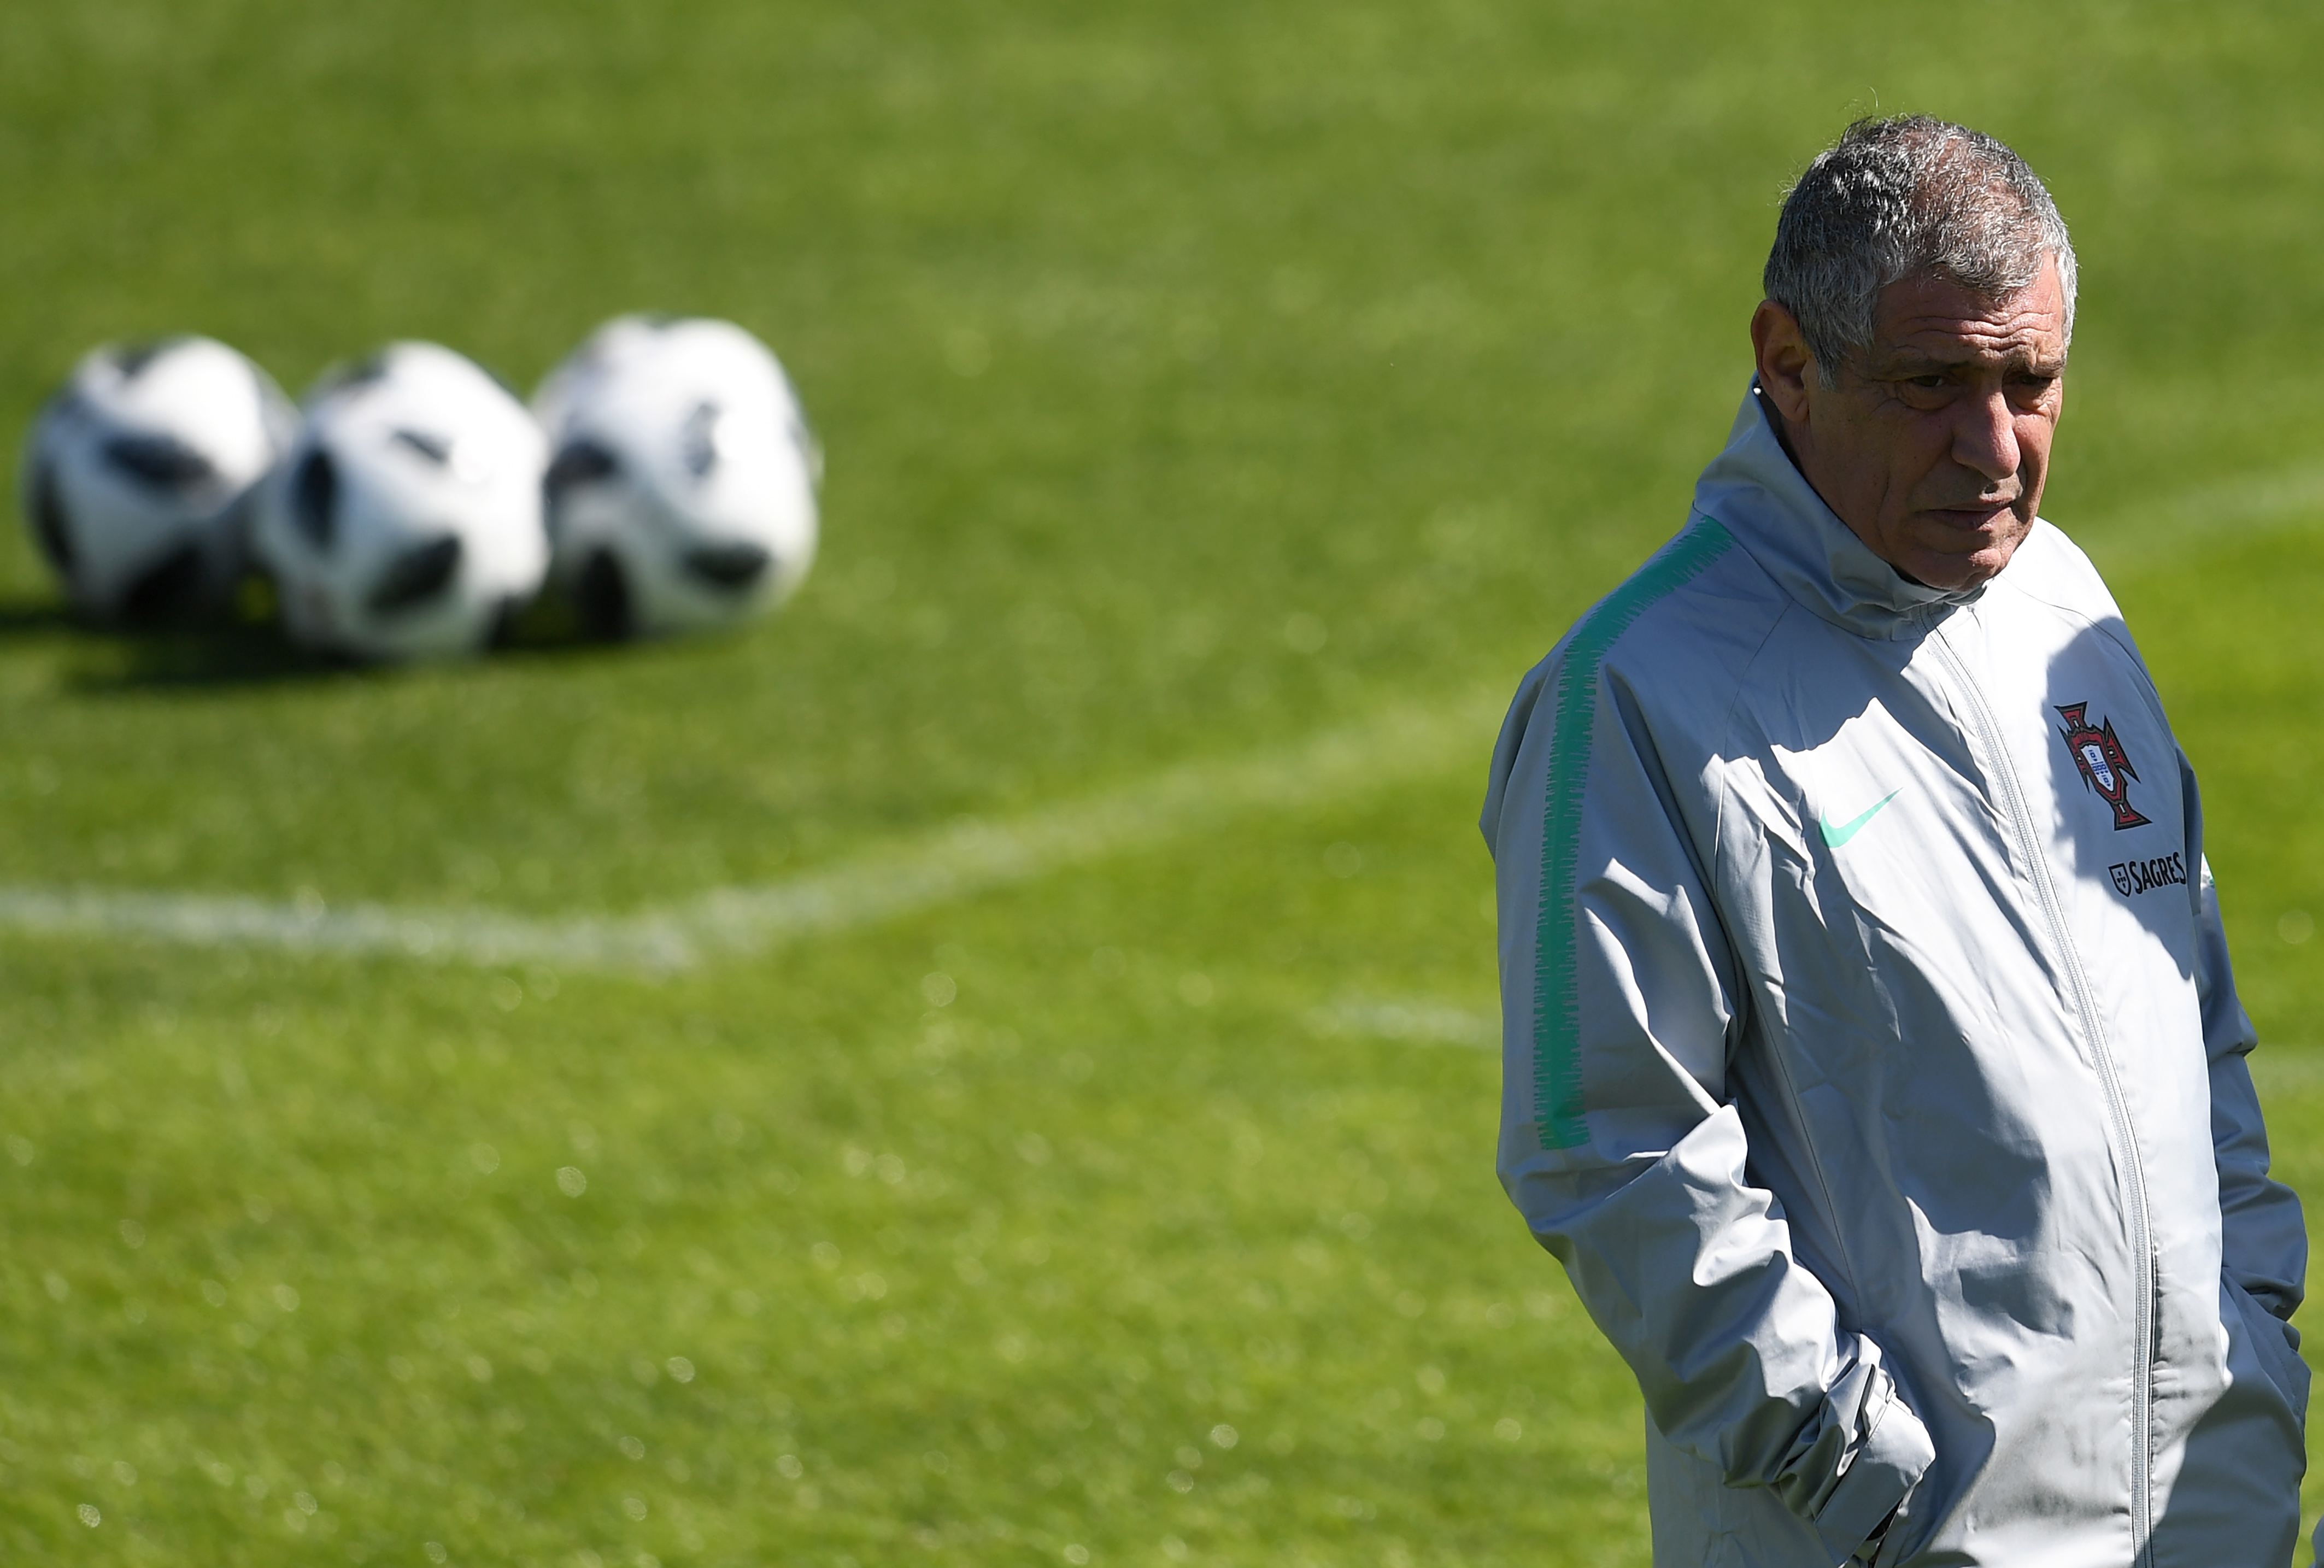 Portugal's coach Fernando Santos attends a training session at the training camp in Oeiras in the outskirts of Lisbon on March 22, 2018 on the eve of a friendly football match between Portugal and Egypt in Zurich. / AFP PHOTO / FRANCISCO LEONG        (Photo credit should read FRANCISCO LEONG/AFP/Getty Images)